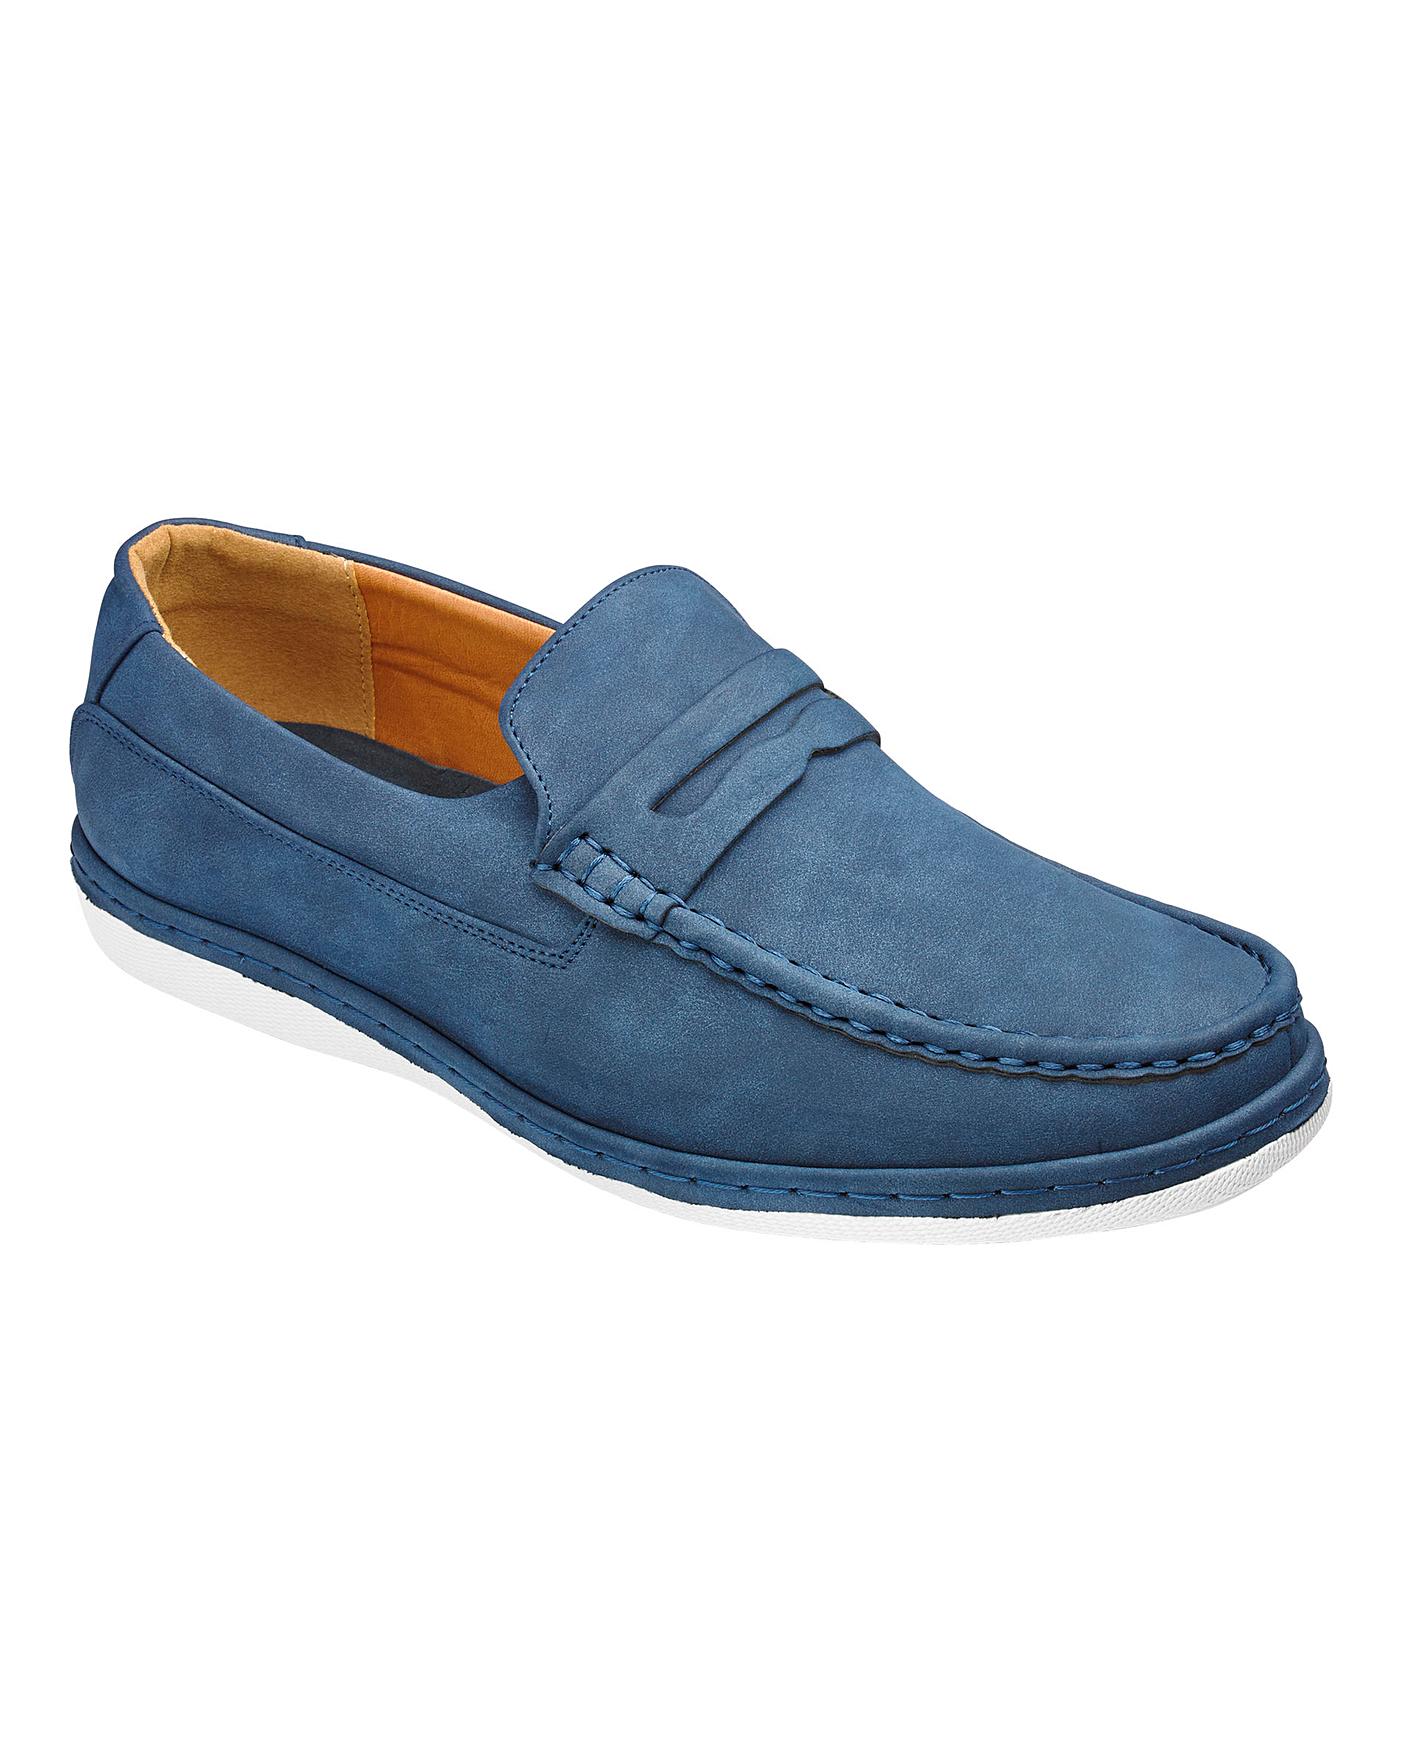 Cushion Walk Slip On Loafers Wide Fit | Crazy Clearance